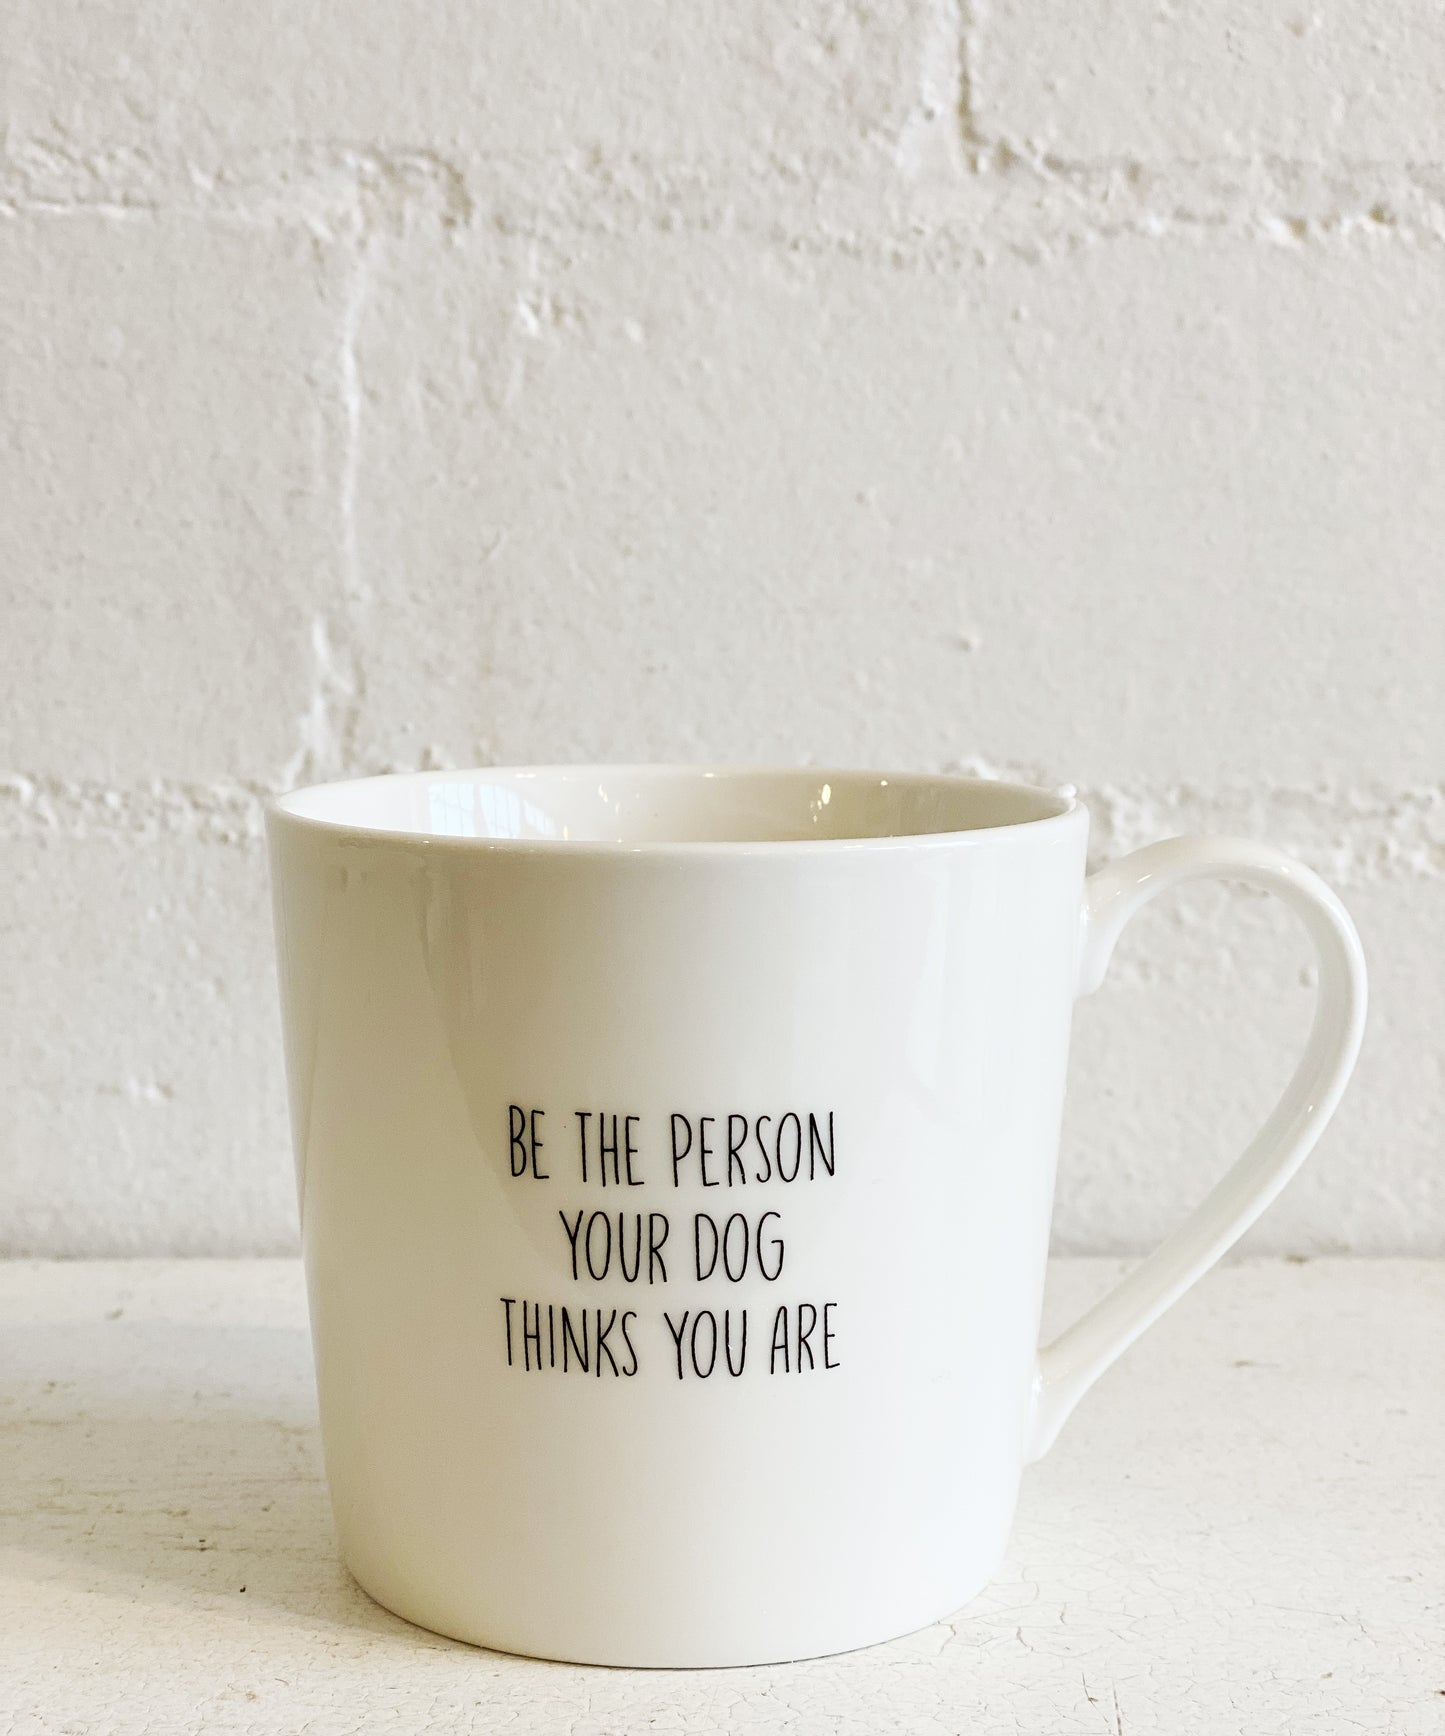 Cafe Mug - Be the person